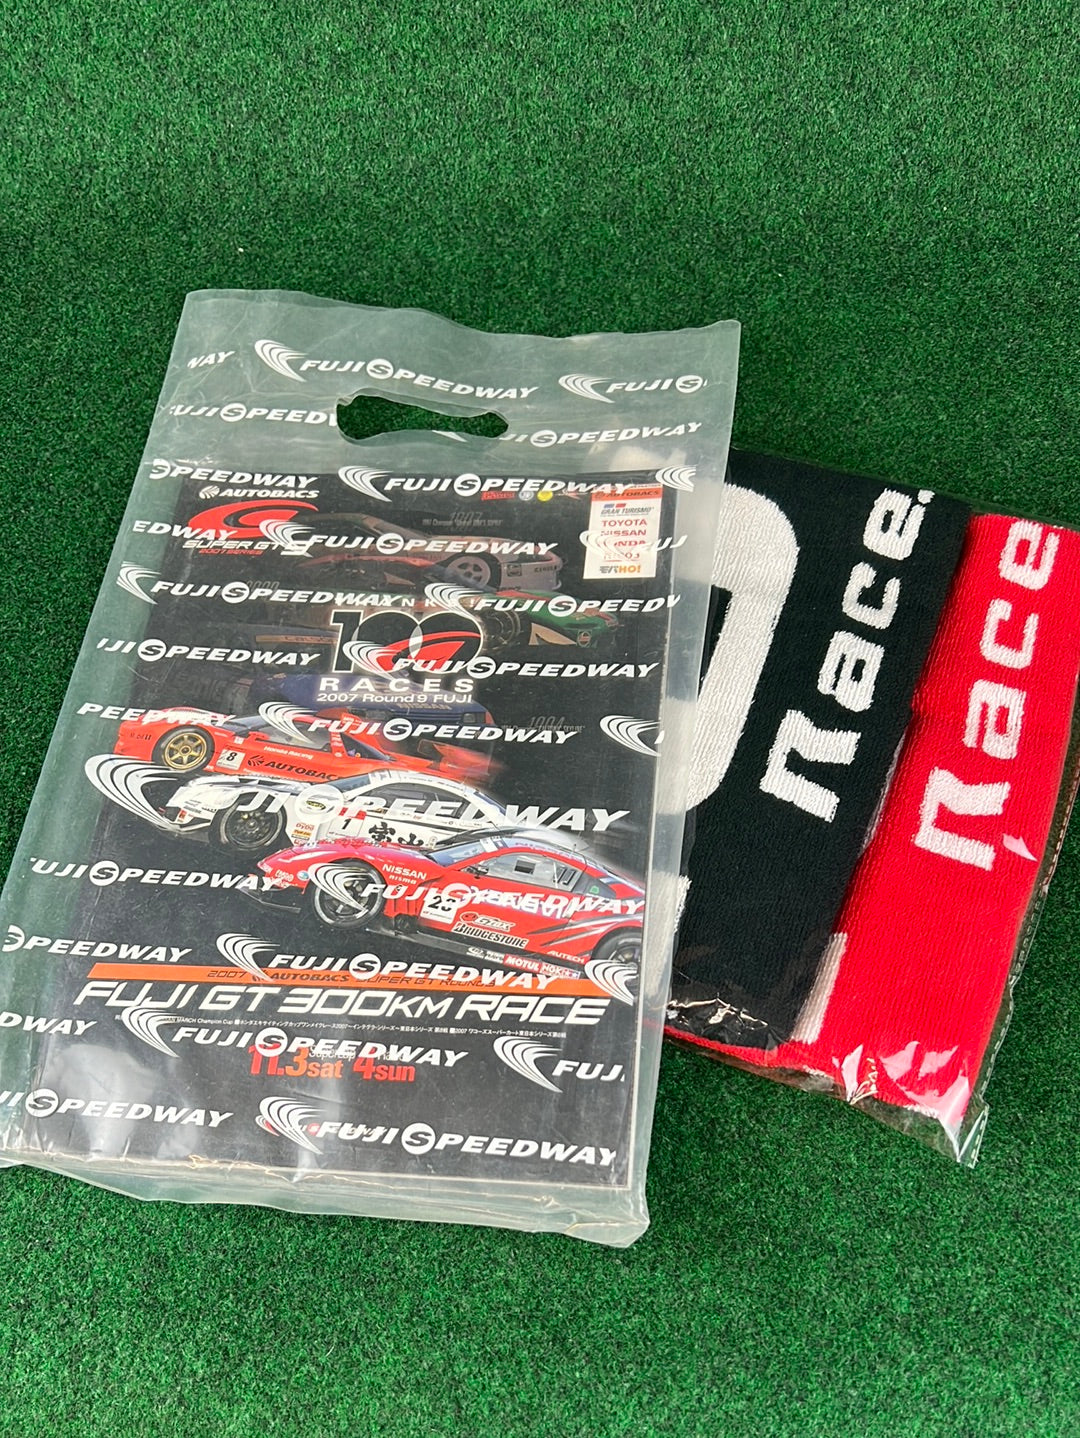 2007 AUTOBACS SuperGT Fuji Speedway  GT Round 9 Official Race Program and Towel Set